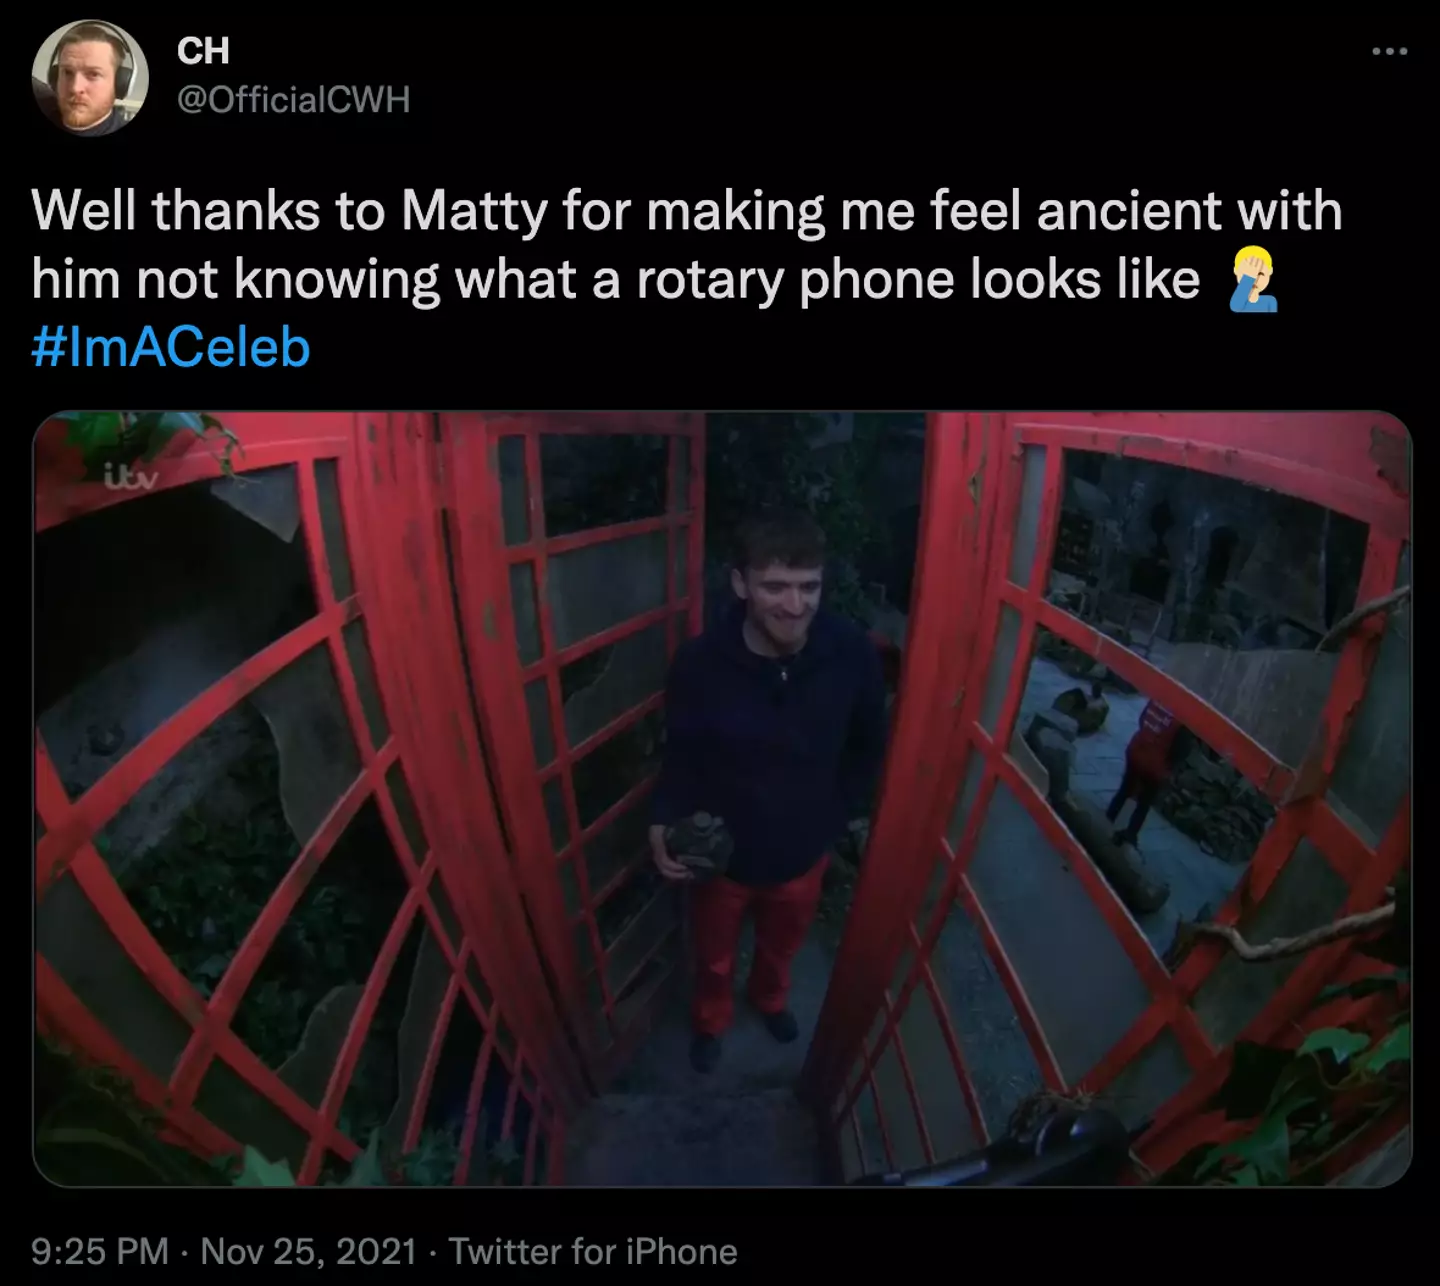 Matty, you've made us feel ancient (